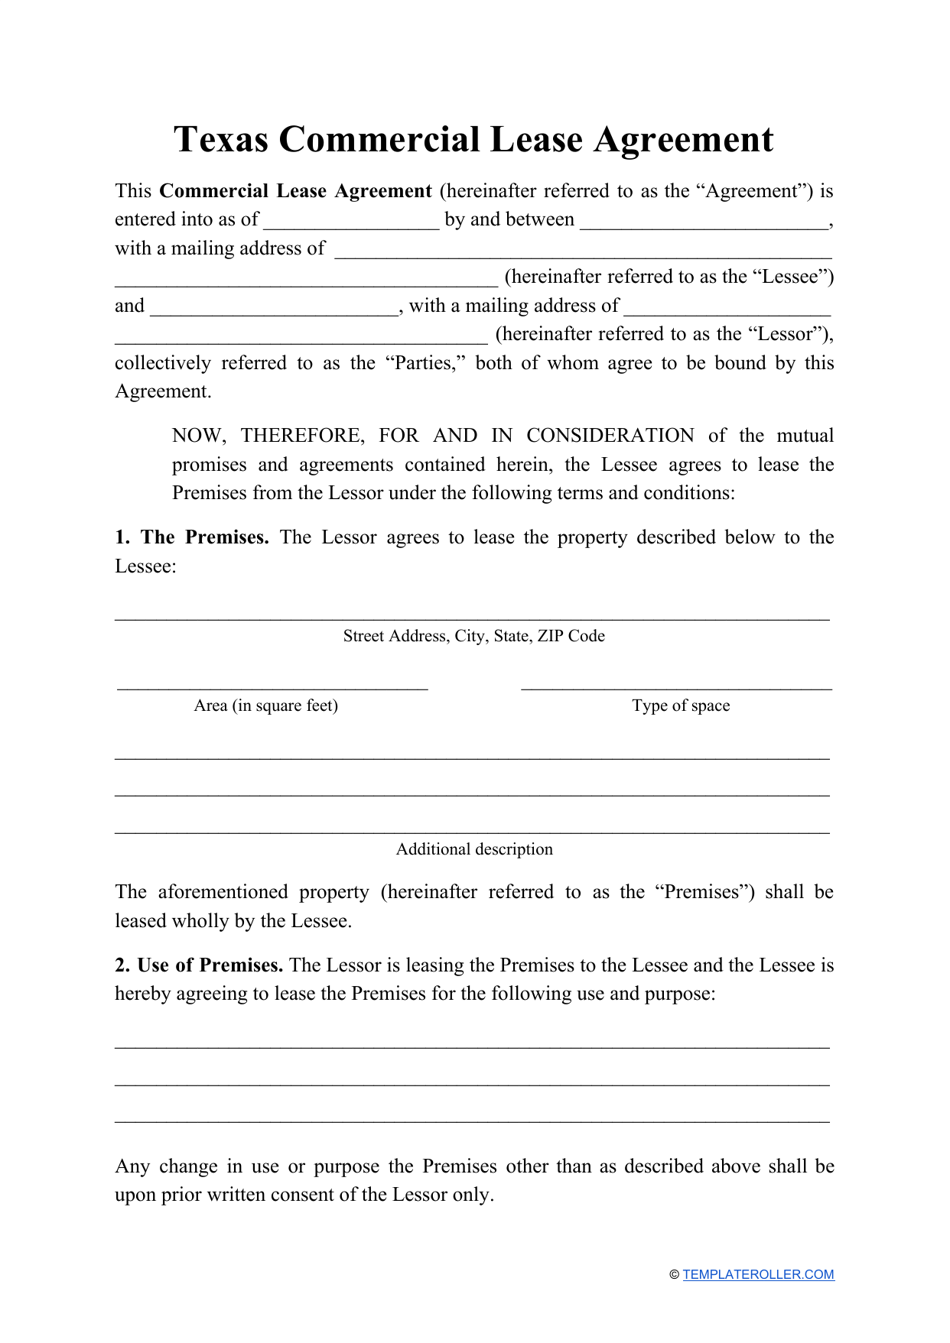 texas-commercial-lease-agreement-template-fill-out-sign-online-and